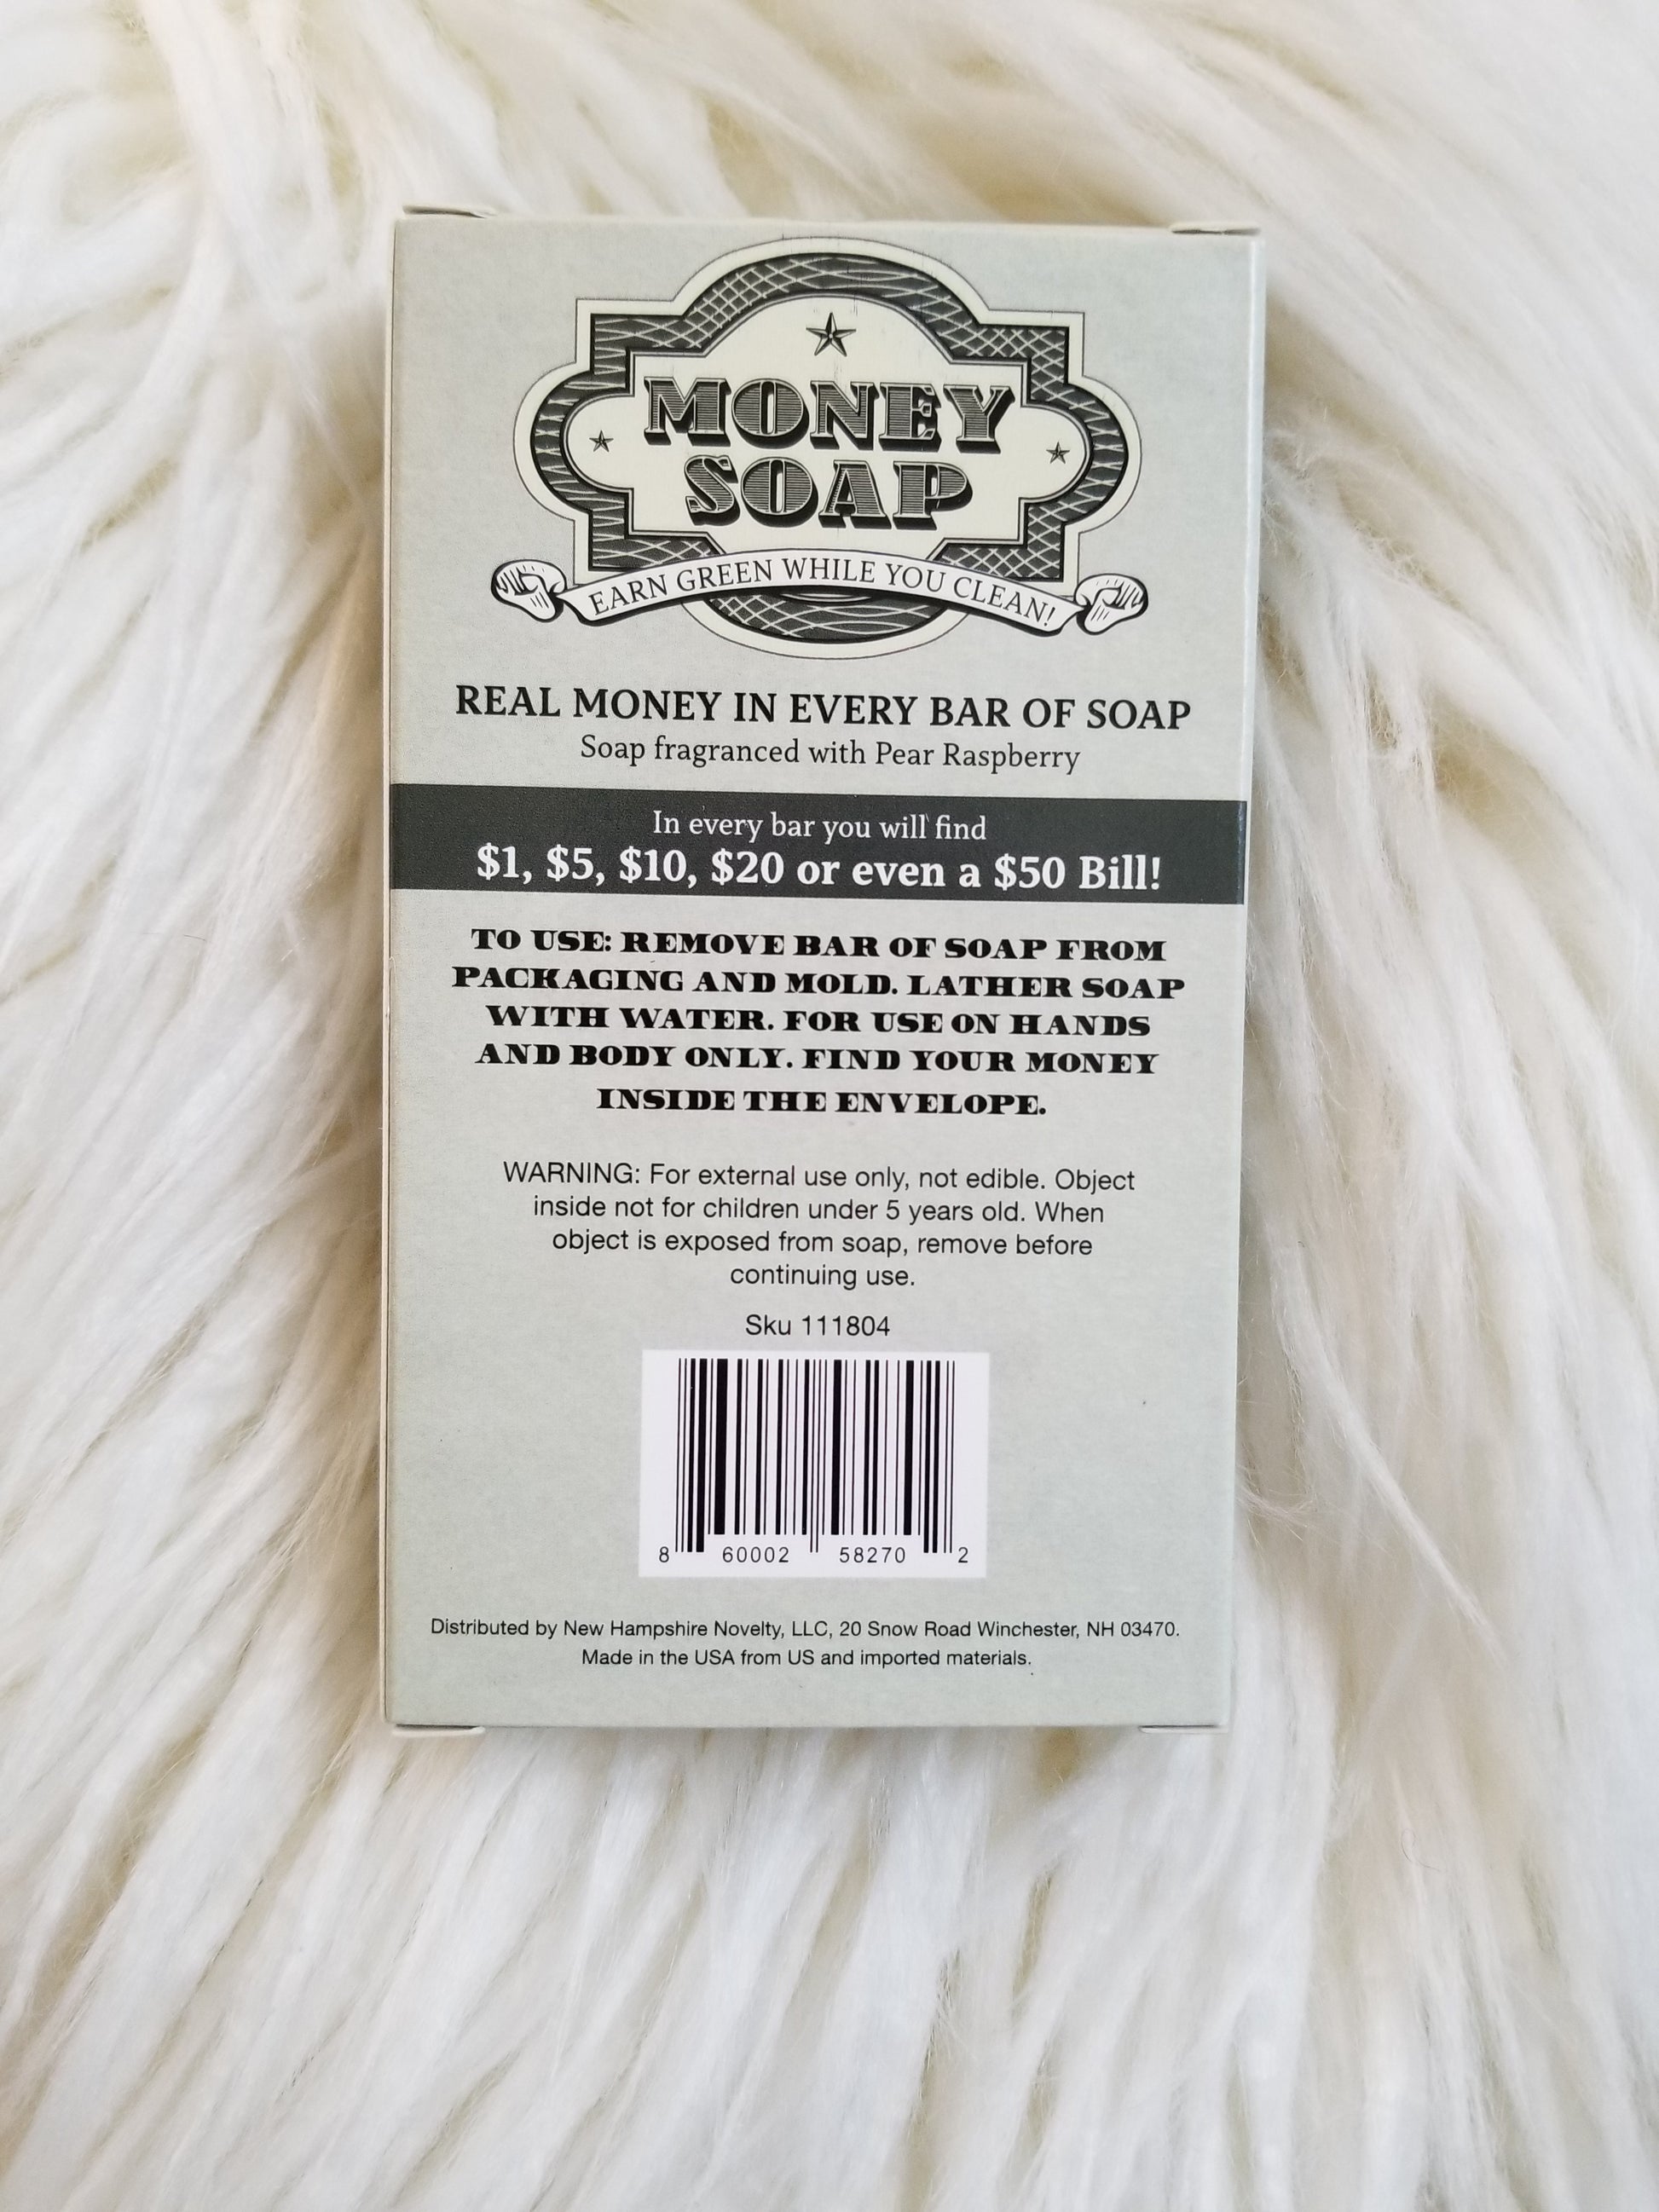 Money Soap - Cash in Every Bar of Soap! – Hampshire Novelty LLC